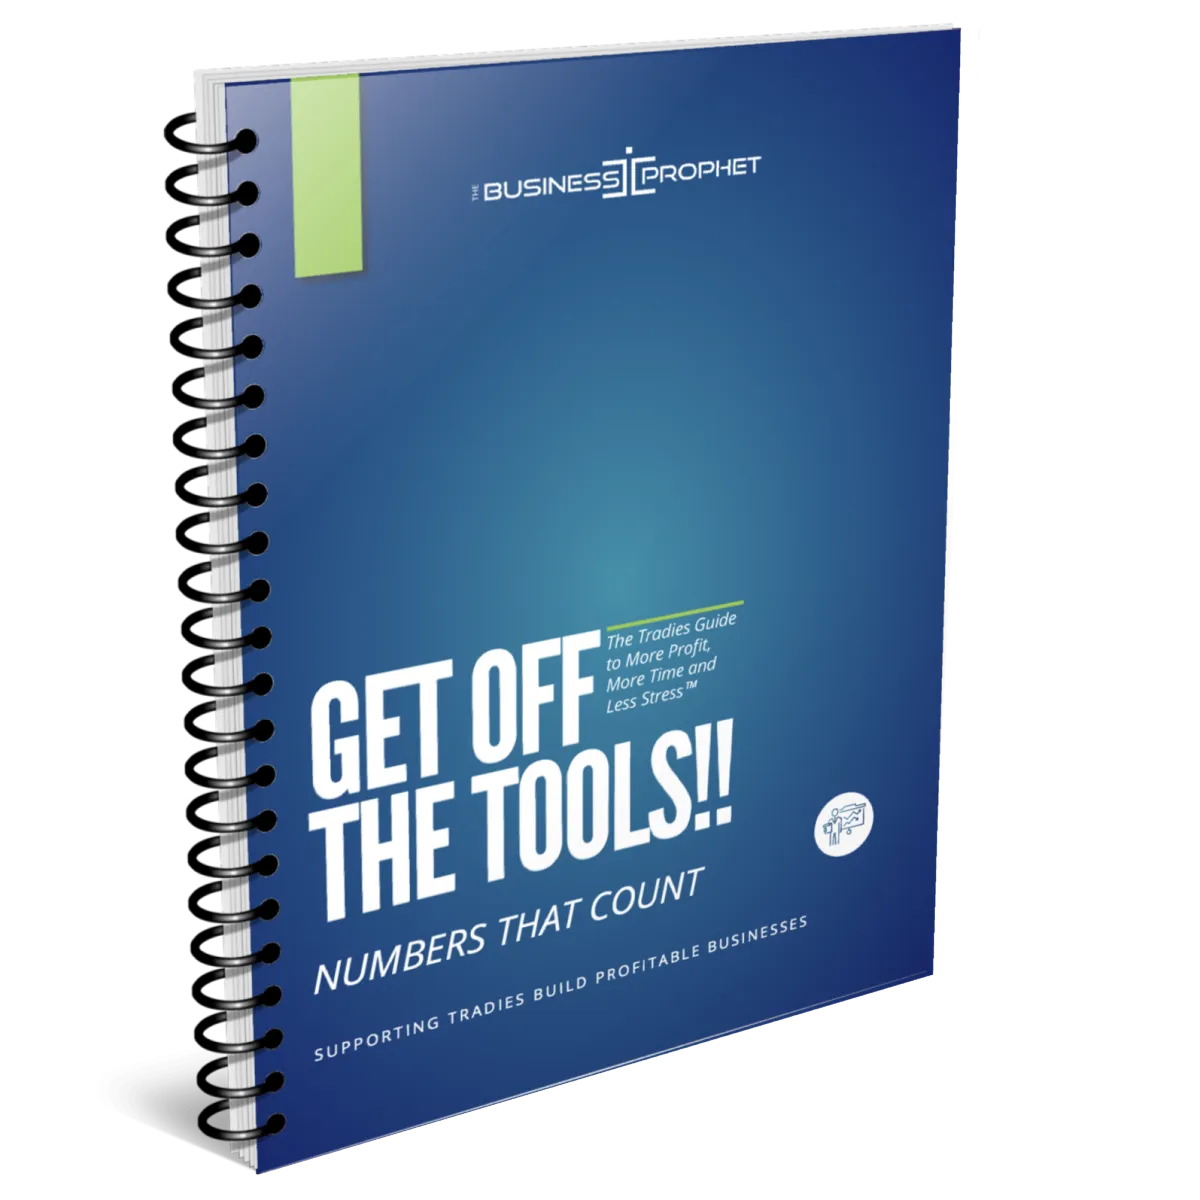 Image of the Get Off The Tools!! Numbers that Count Guidebook